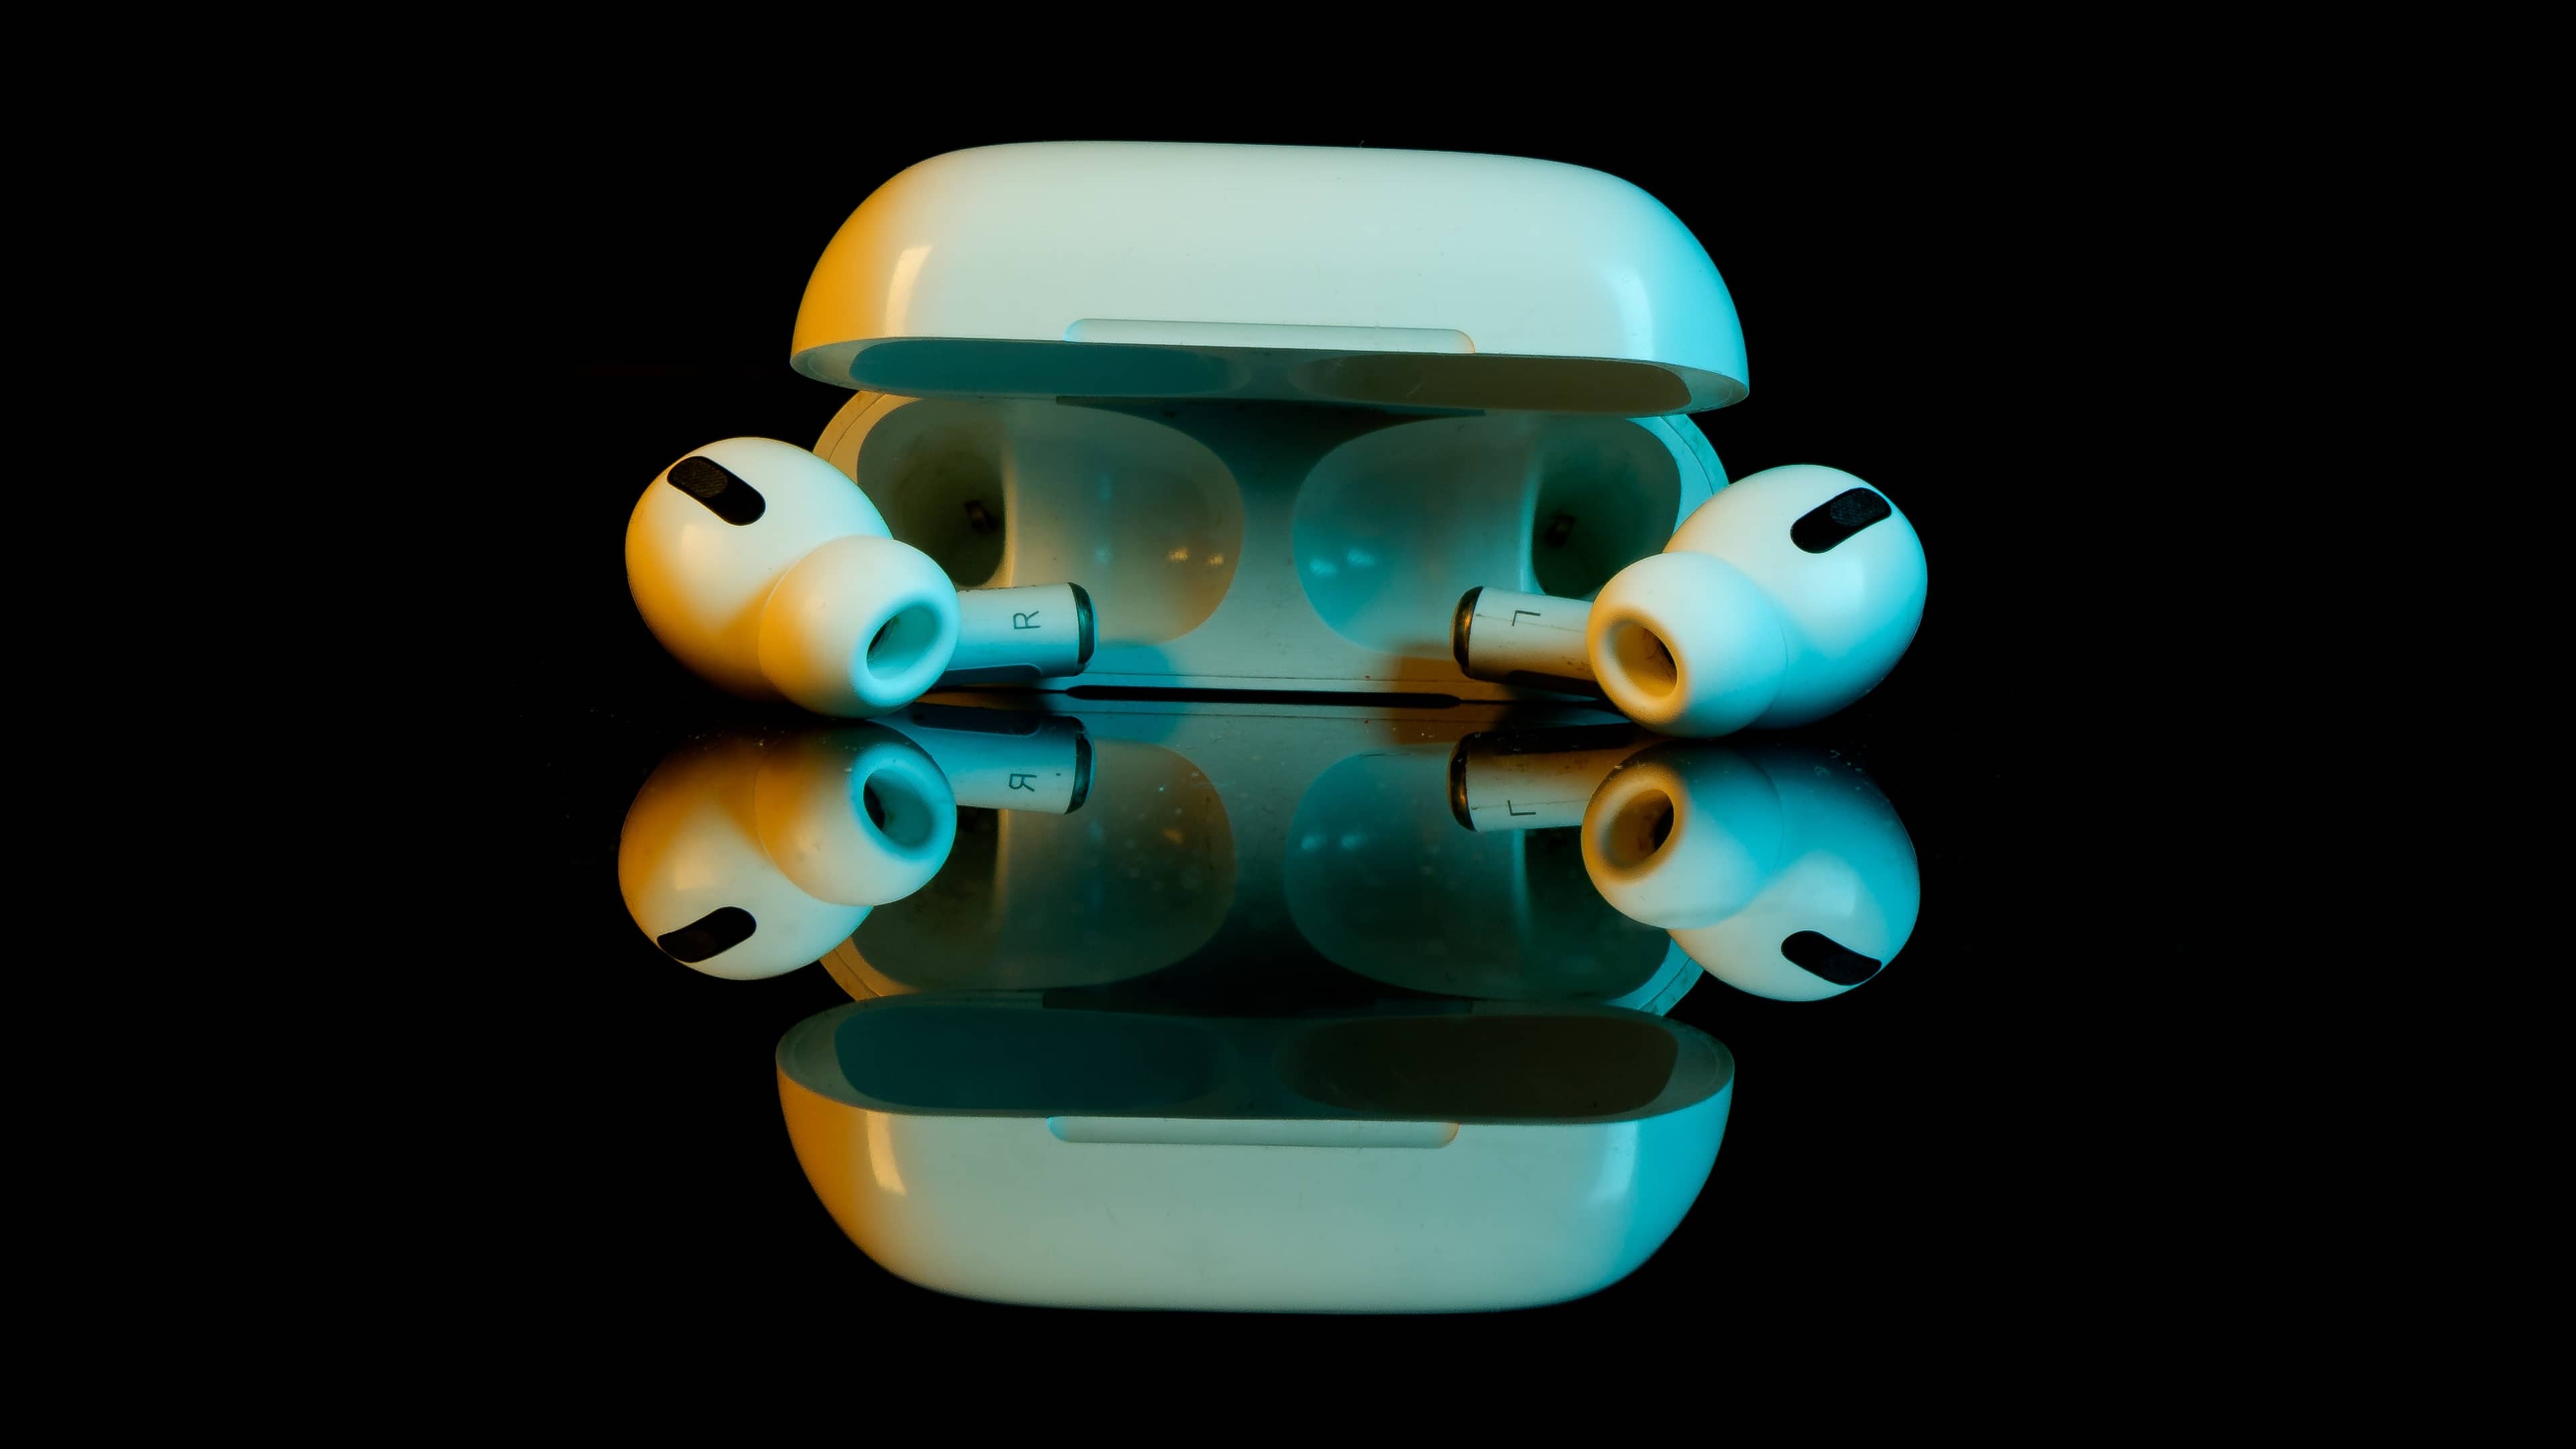 A photograph showing a top-down view of an AirPods Pro case with the lid open and both earbud in the case